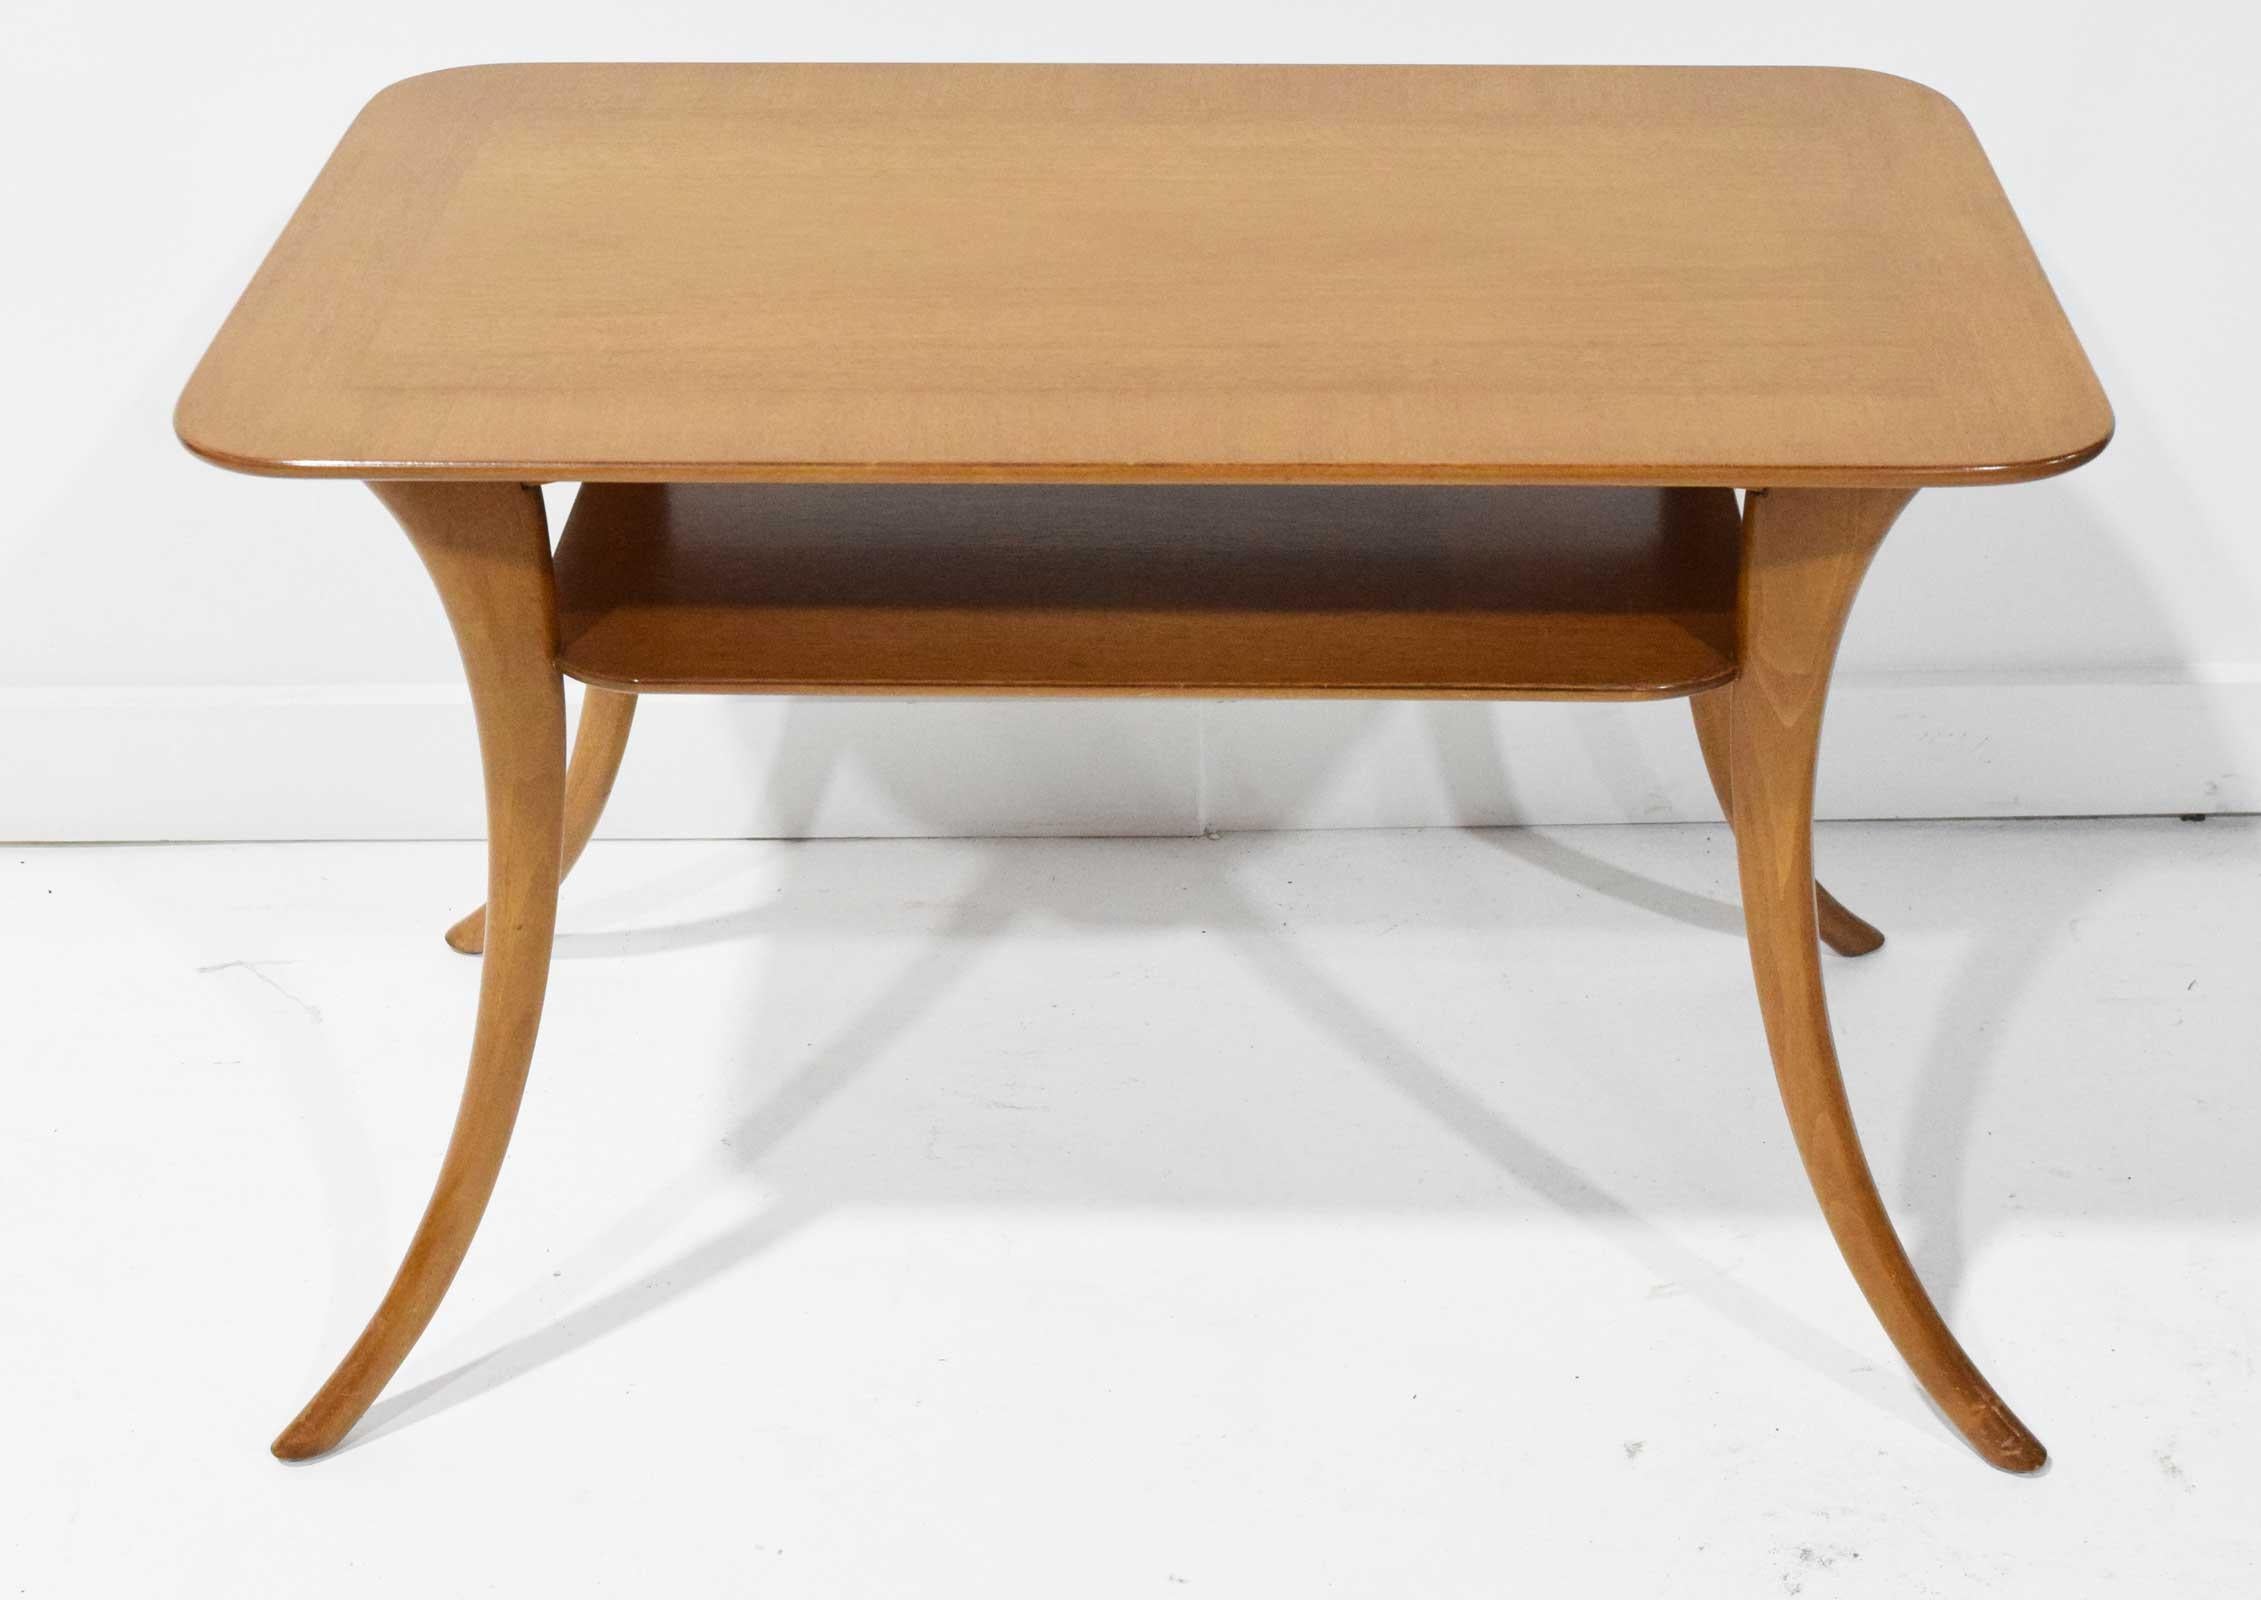 Mid-Century Modern walnut klismos leg coffee table or cocktail table designed by T.H. Robsjohn-Gibbings for Widdicomb furniture. Elegant and graceful square top with a two-tier design supported by splayed klismos style legs. The table retains its